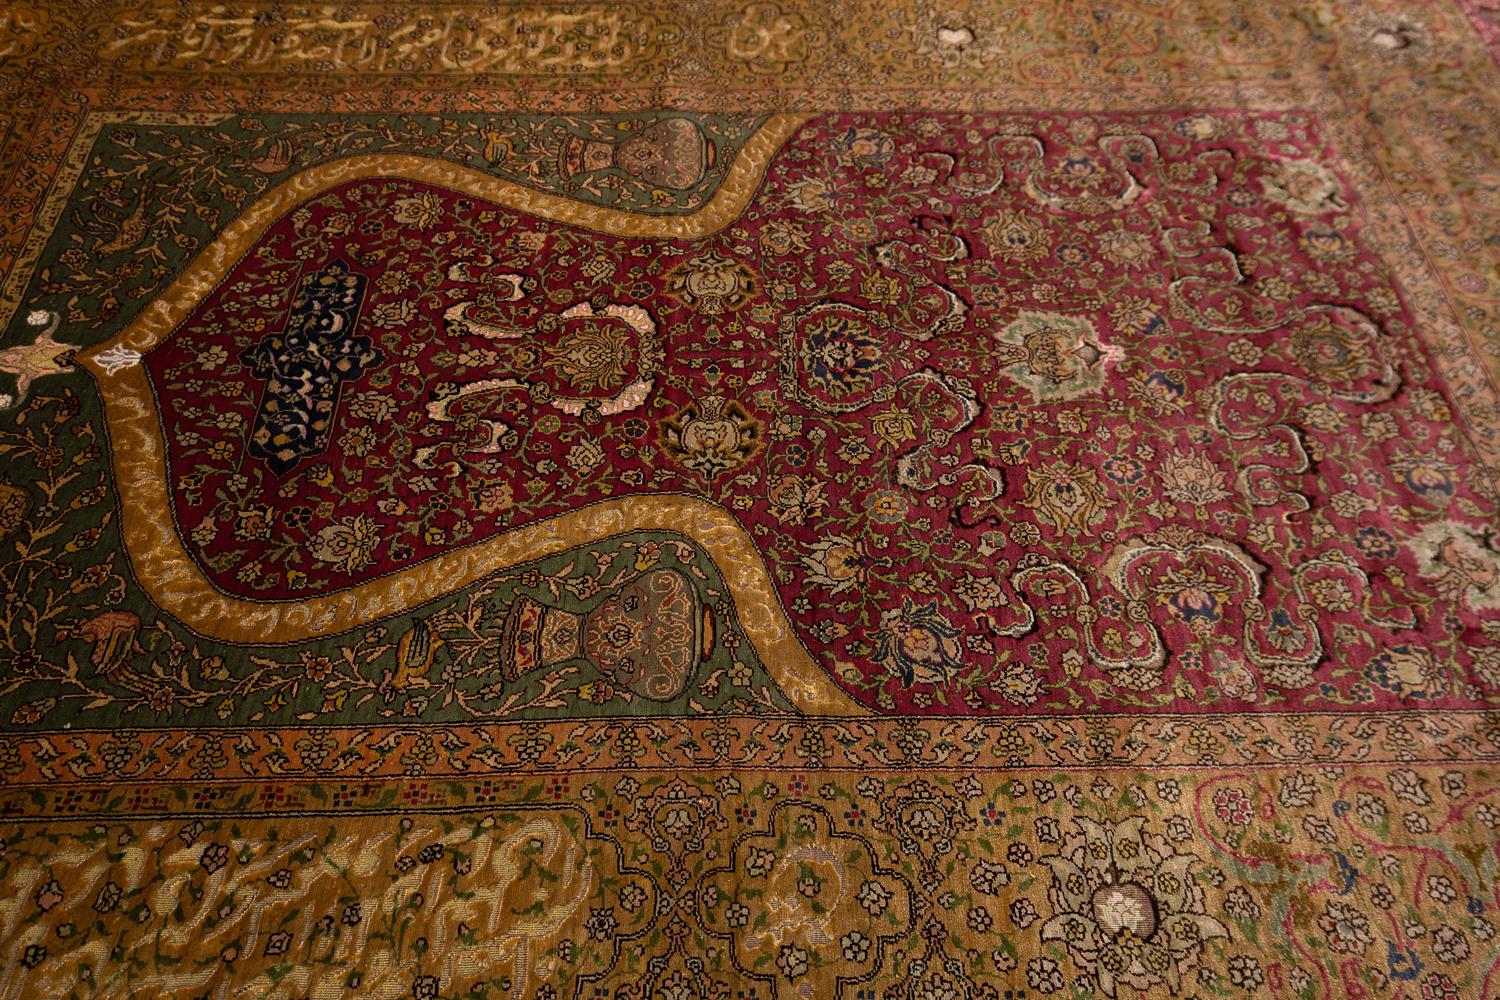 This is a silk- and metal-thread kum kapi prayer rug. It features a head design woven by Zareh Penyamin and bears the calligraphic signature mark of his in the metal thread at the base of the central palmette. Zareh is still considered to have been